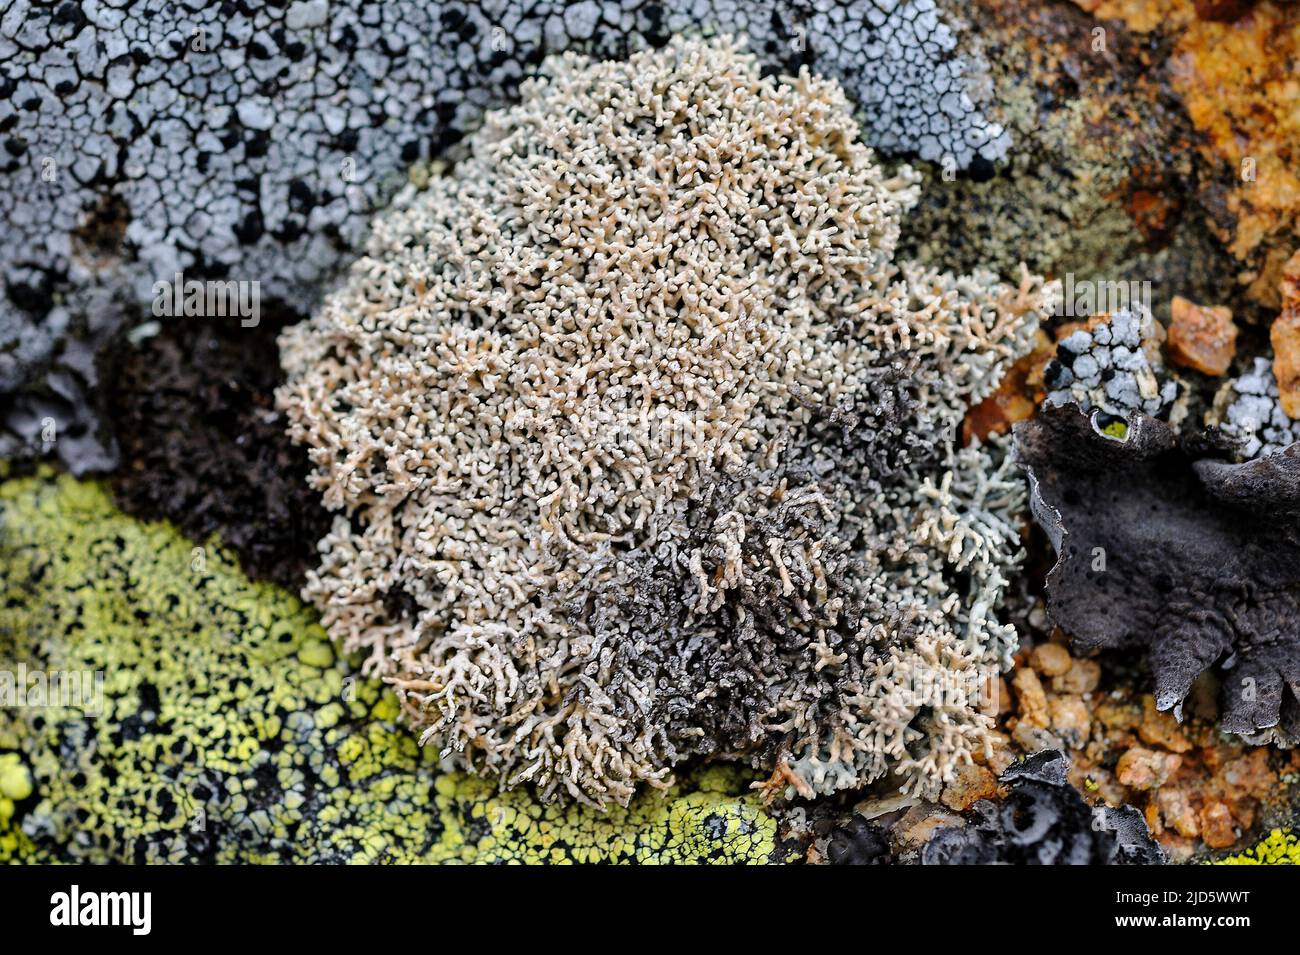 Pertusaria sp, possibly P. corallina.. Photo from Knaben (Agder, Norway) at about 900 meters elevation. Stock Photo